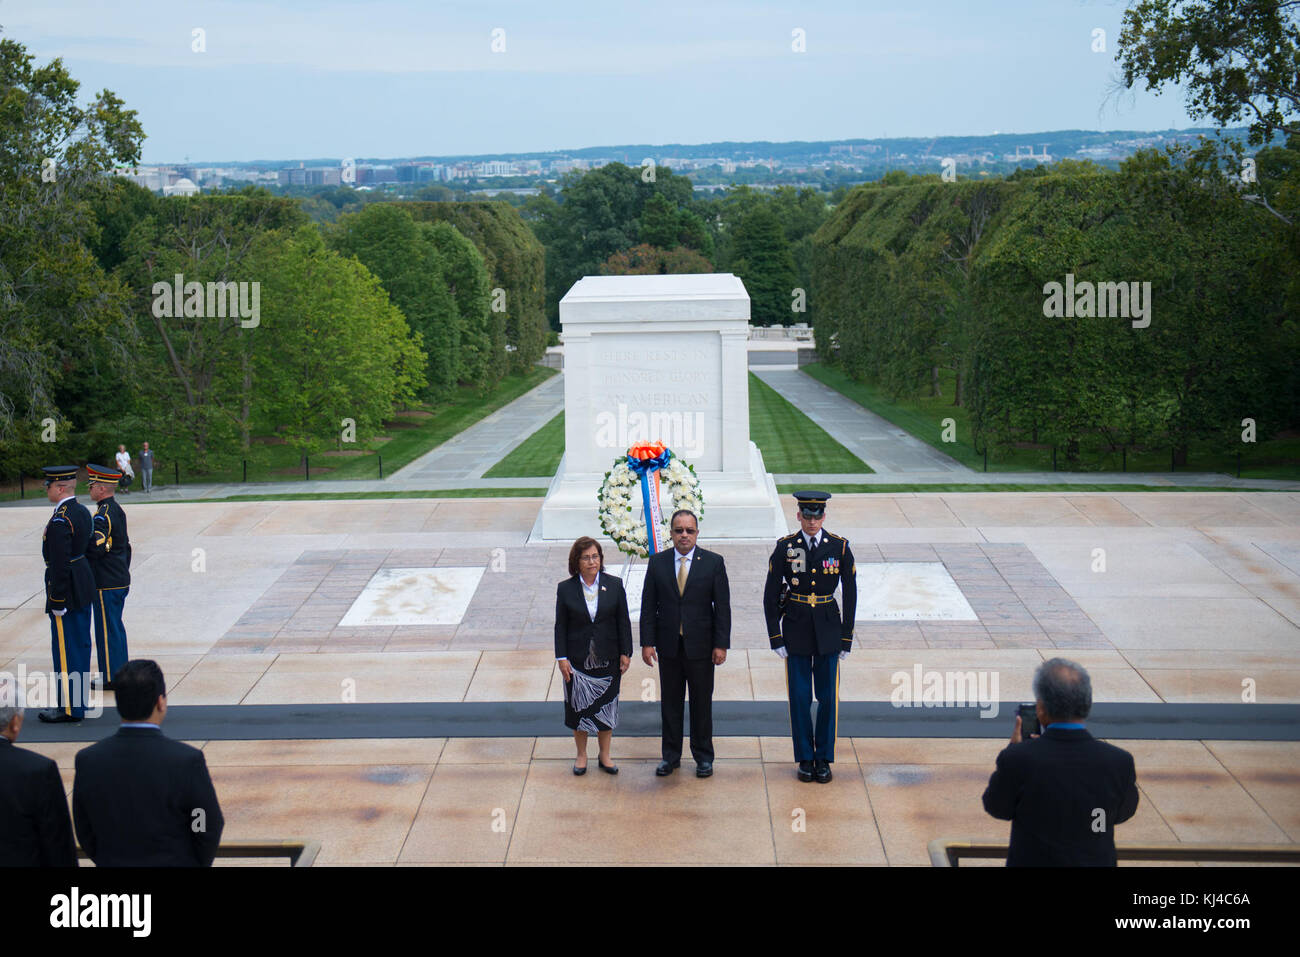 President of the Republic of the Marshall Islands, H.E. Hilda C. Heine, Participates in a Public Wreath-Laying Ceremony at Arlington National Cemetery (37004675066) Stock Photo